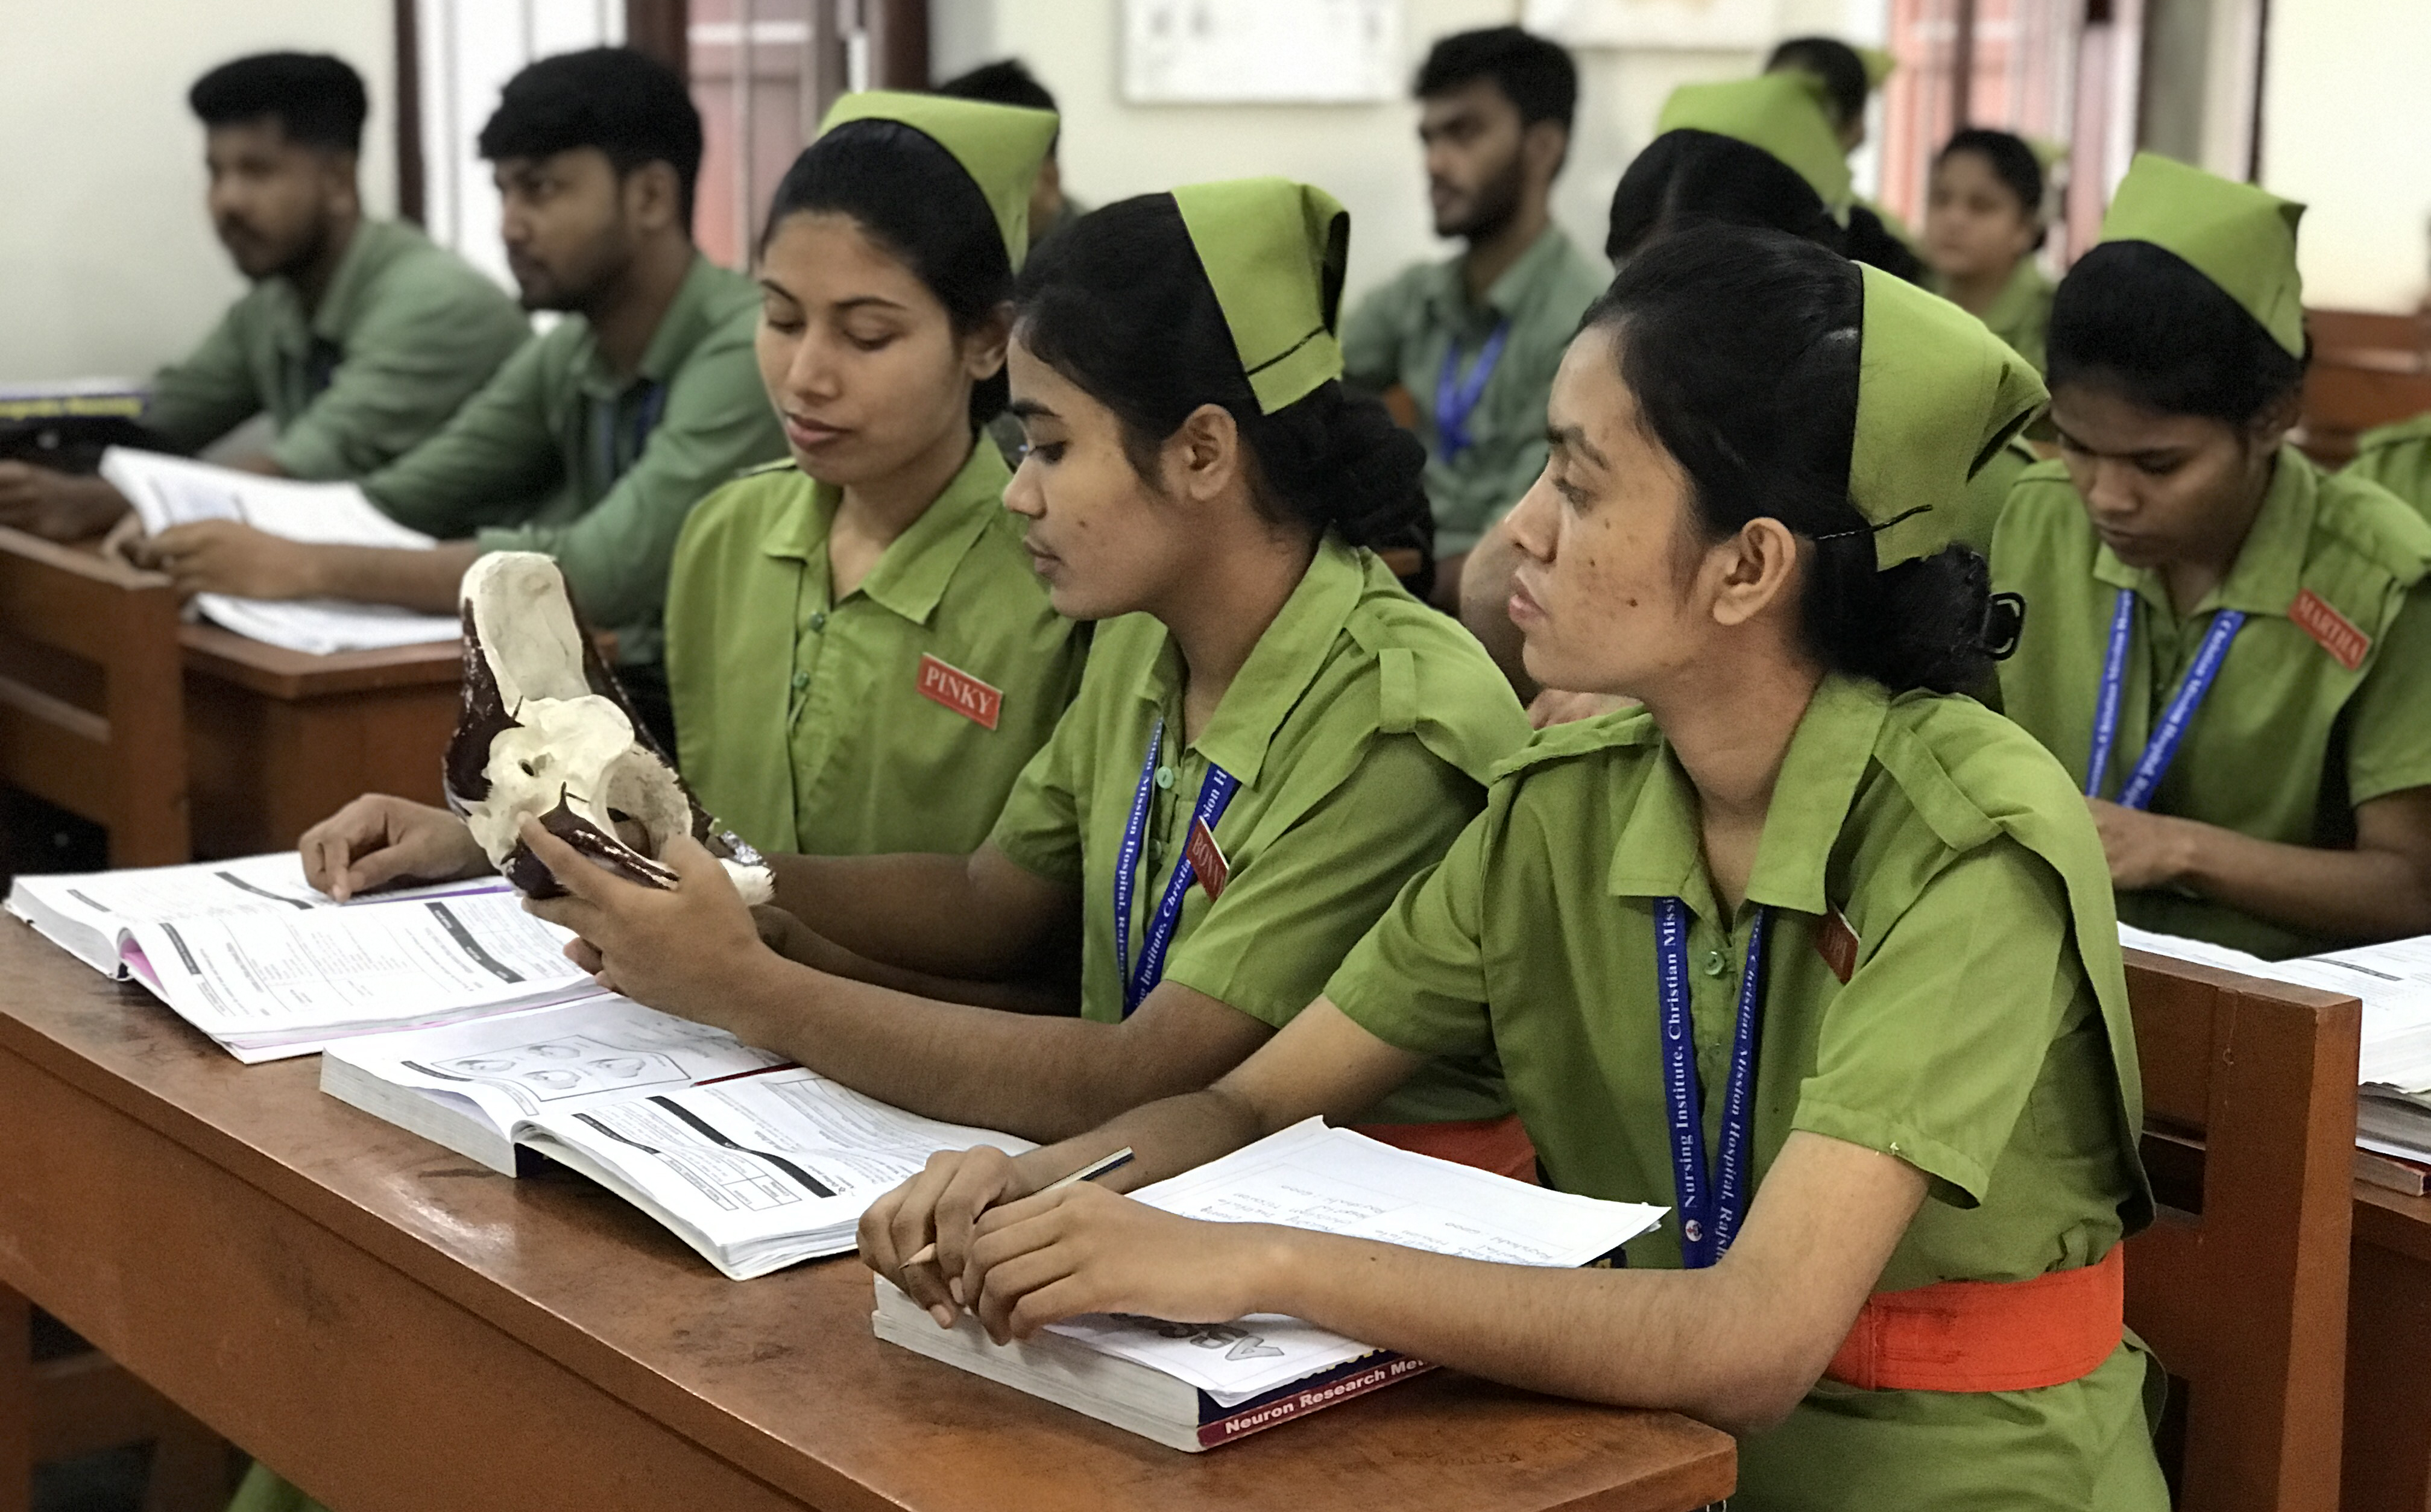 Nursing students sit at tables in a school classroom